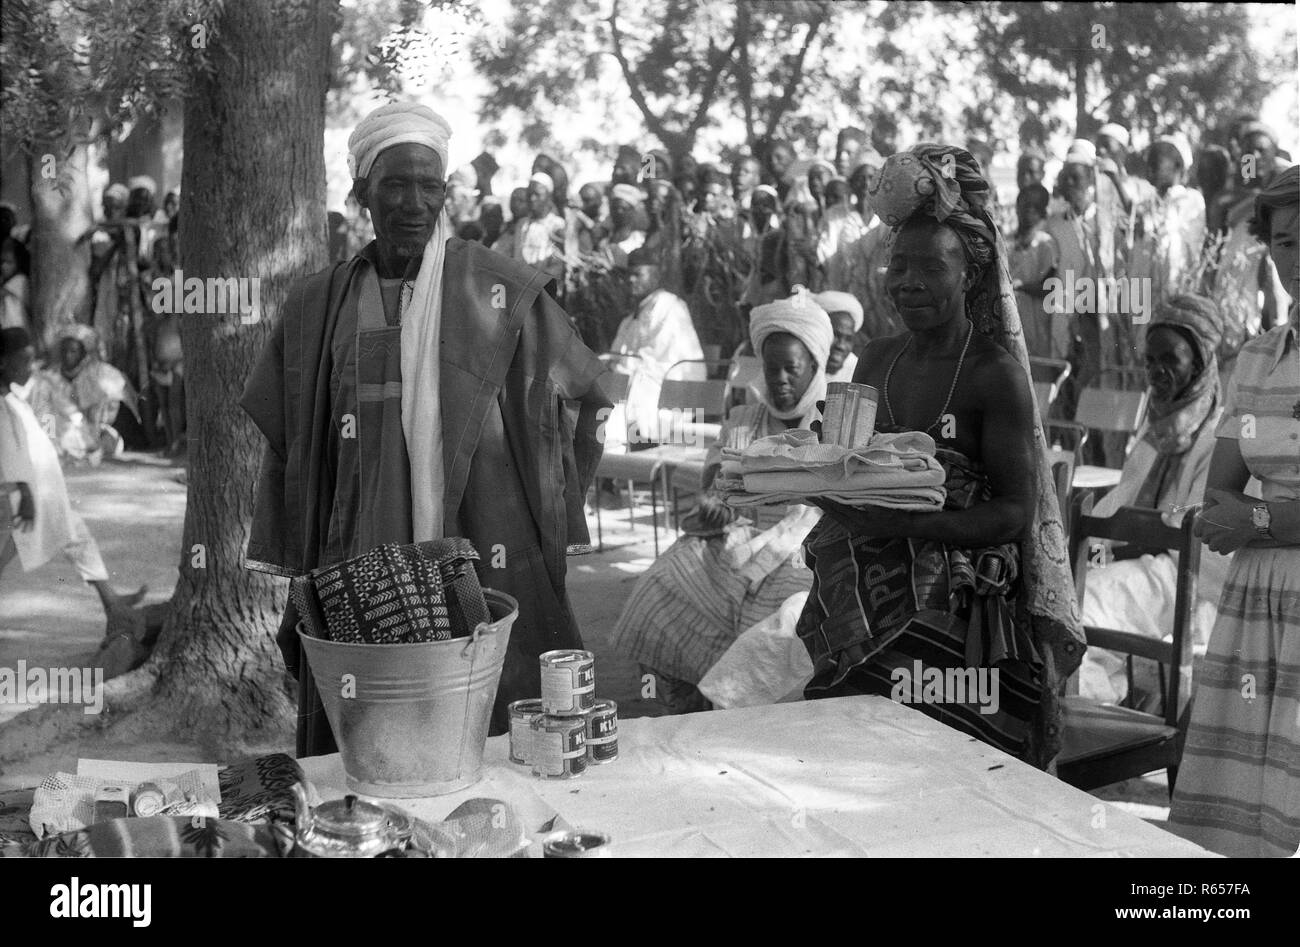 Native Nigerians and Europeans sharing gifts 1950's Group of People, Nigeria Africa DAVE BAGNALL PHOTOGRAPHY Stock Photo